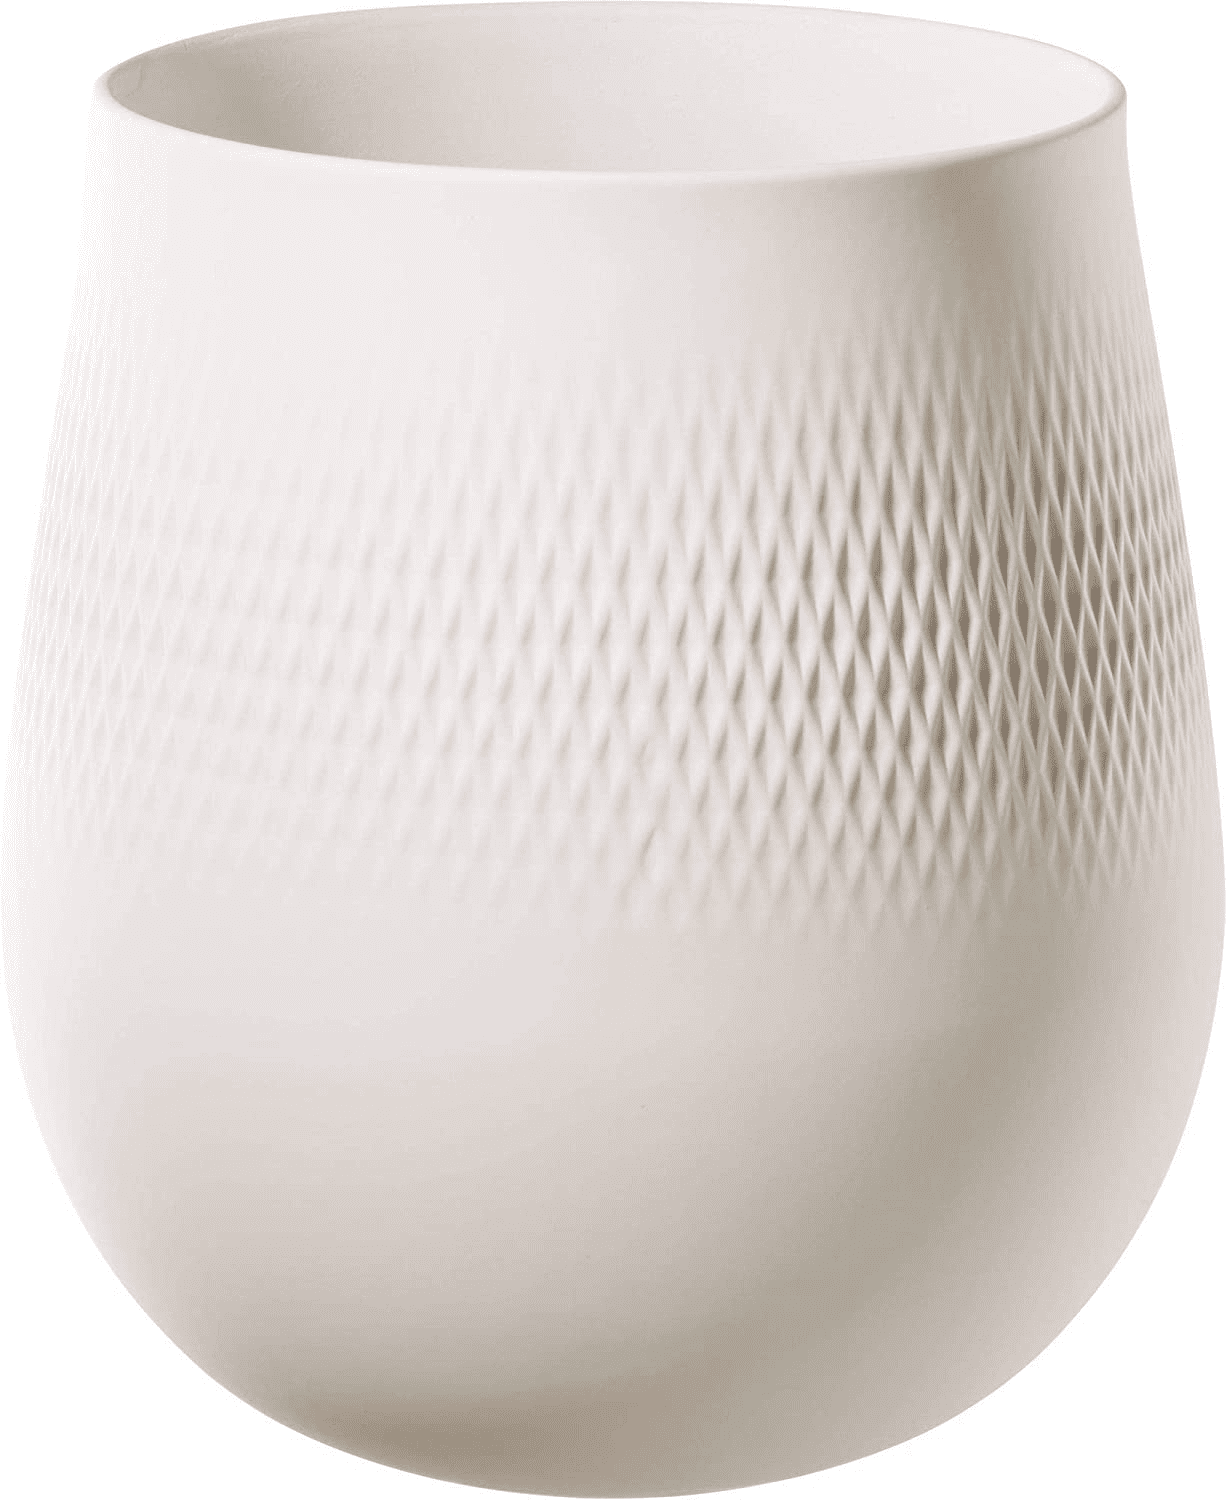 Villeroy & Boch Collier Blanc Tall Vase : Perle, 6.25 in, White – White / 8 in